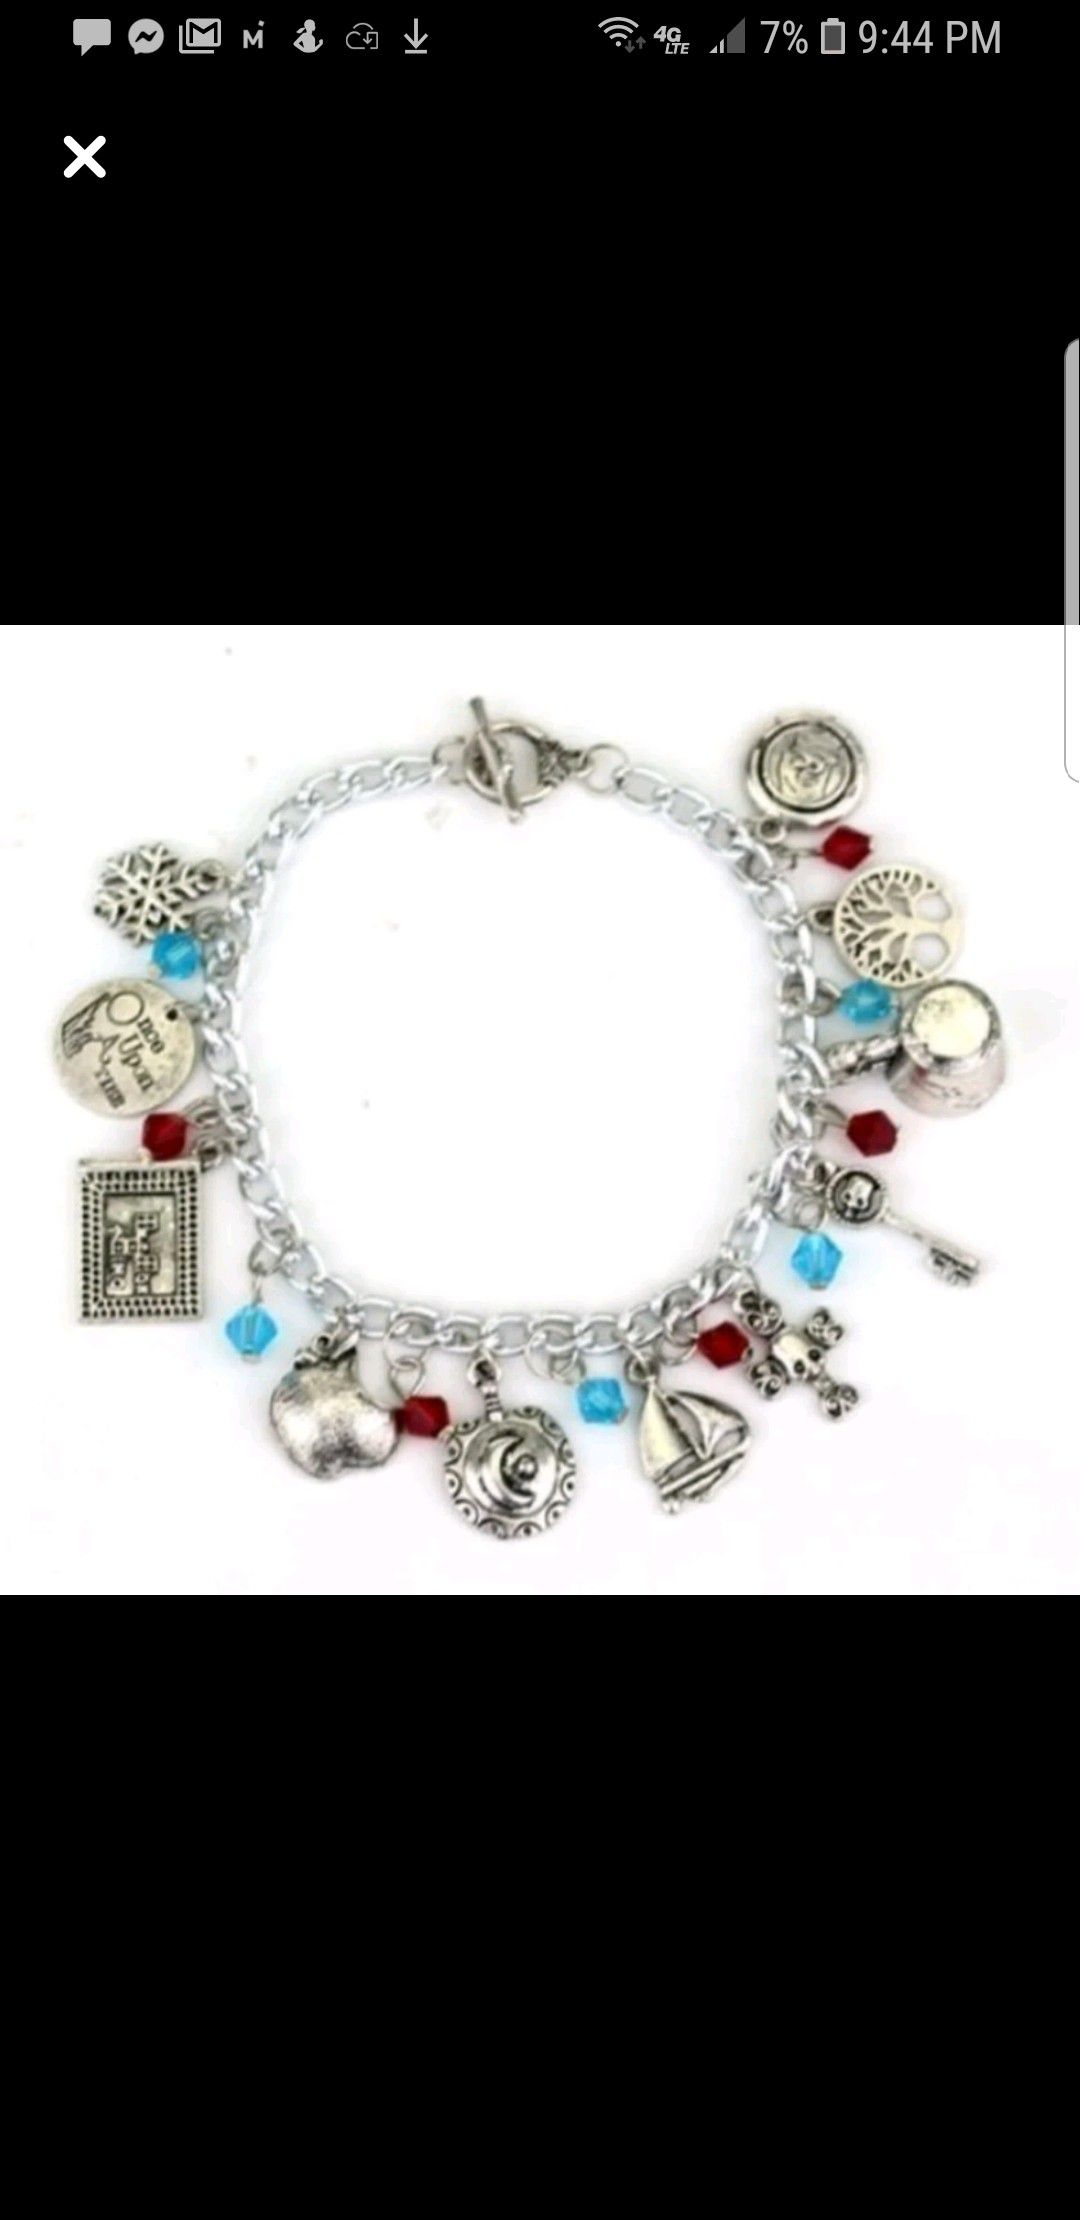 Once upon a time charm bracelet